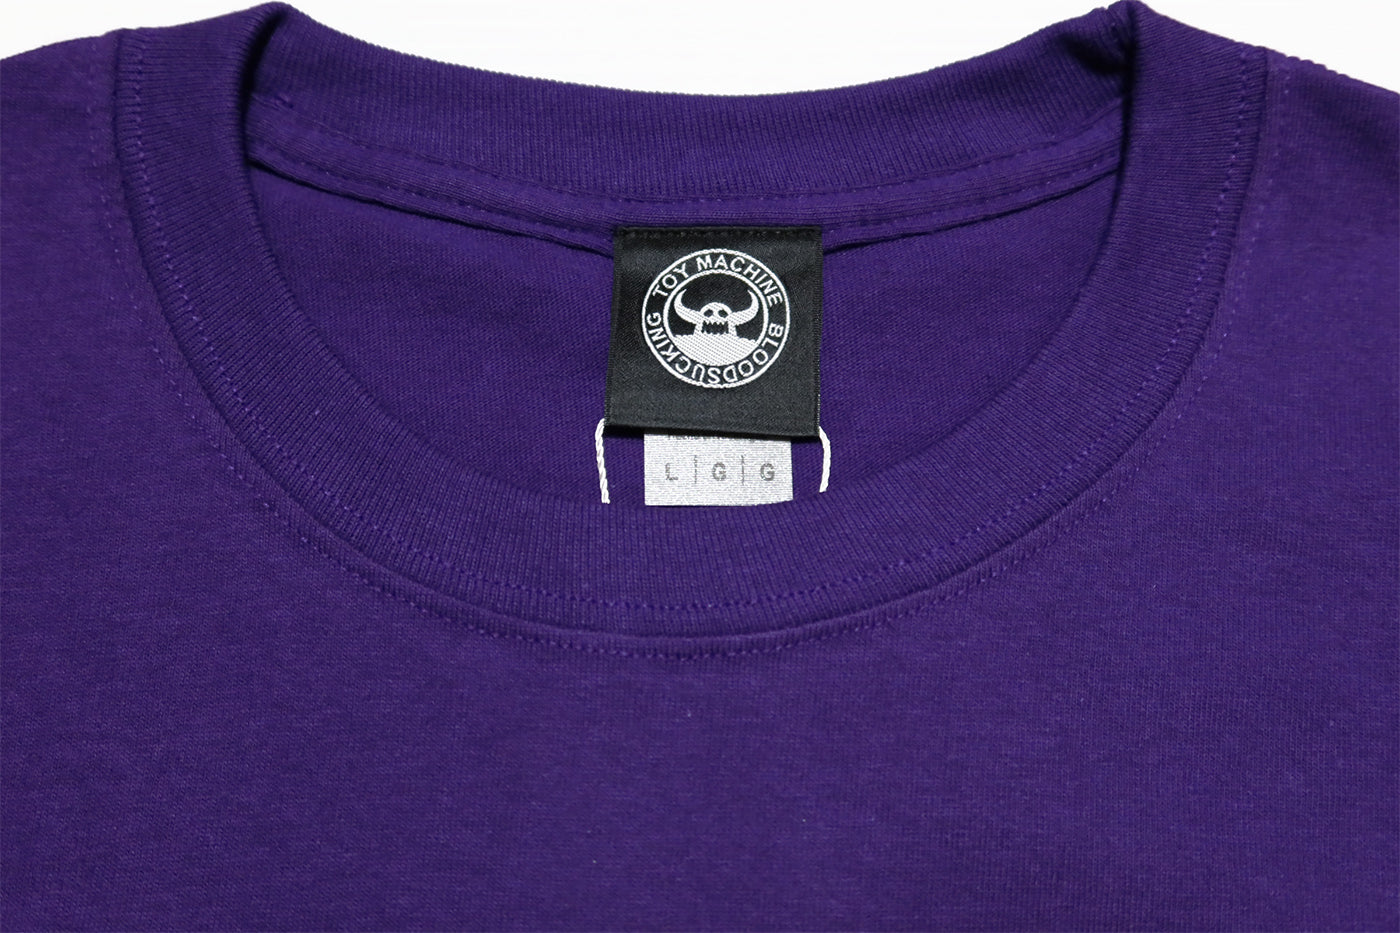 TOY MACHINE Toy Machine Long Sleeve T-Shirt SECT ARM EMBROIDERY Embroidery Print Long T TMPBLT2 Purple